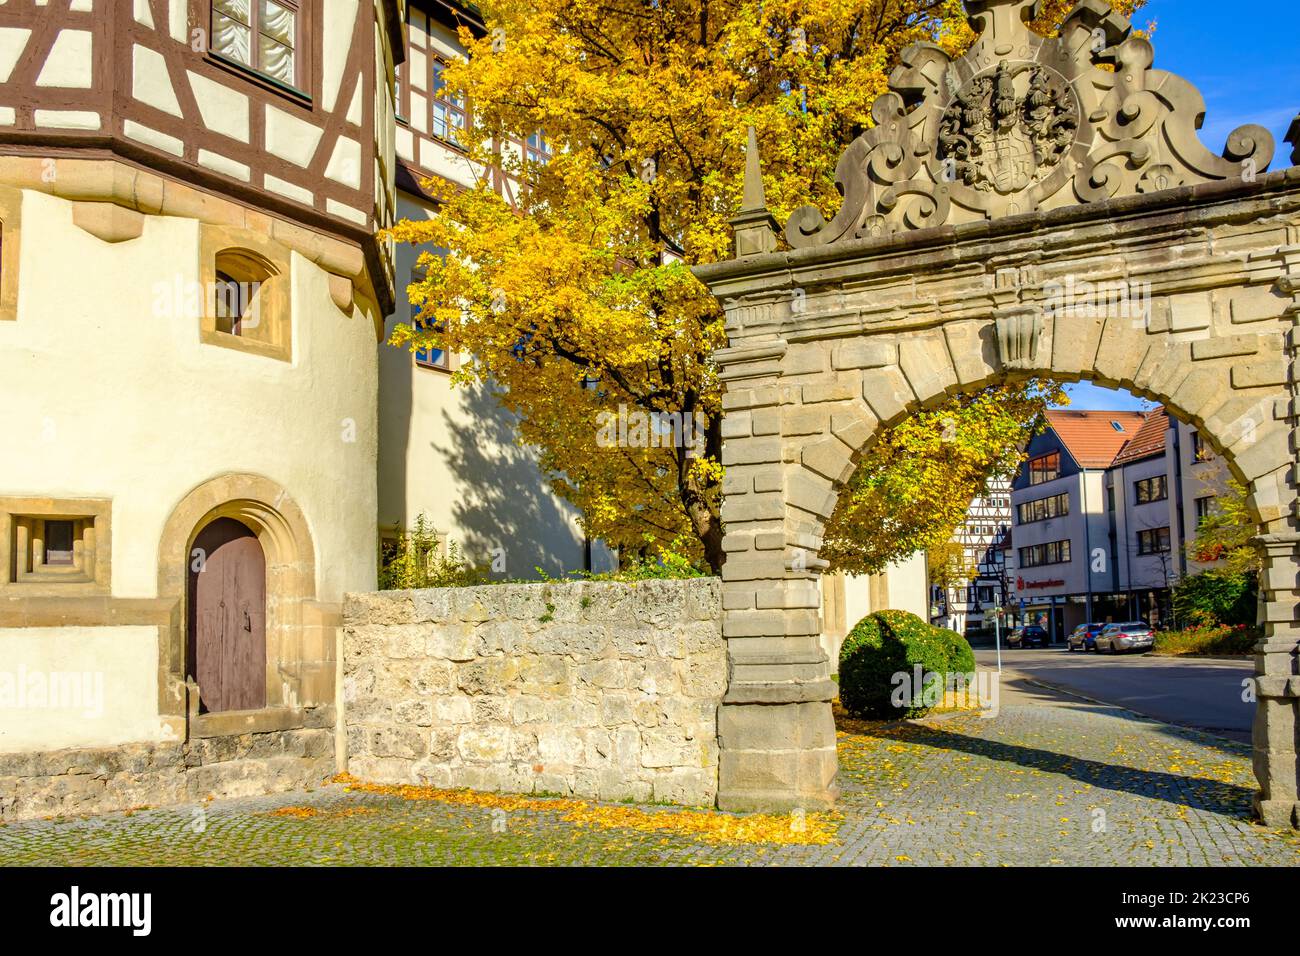 Urach Residential Palace, a Gothic and Renaissance edifice, Bad Urach, Swabian Alb, Baden-Württemberg, Germany, Europe. Stock Photo